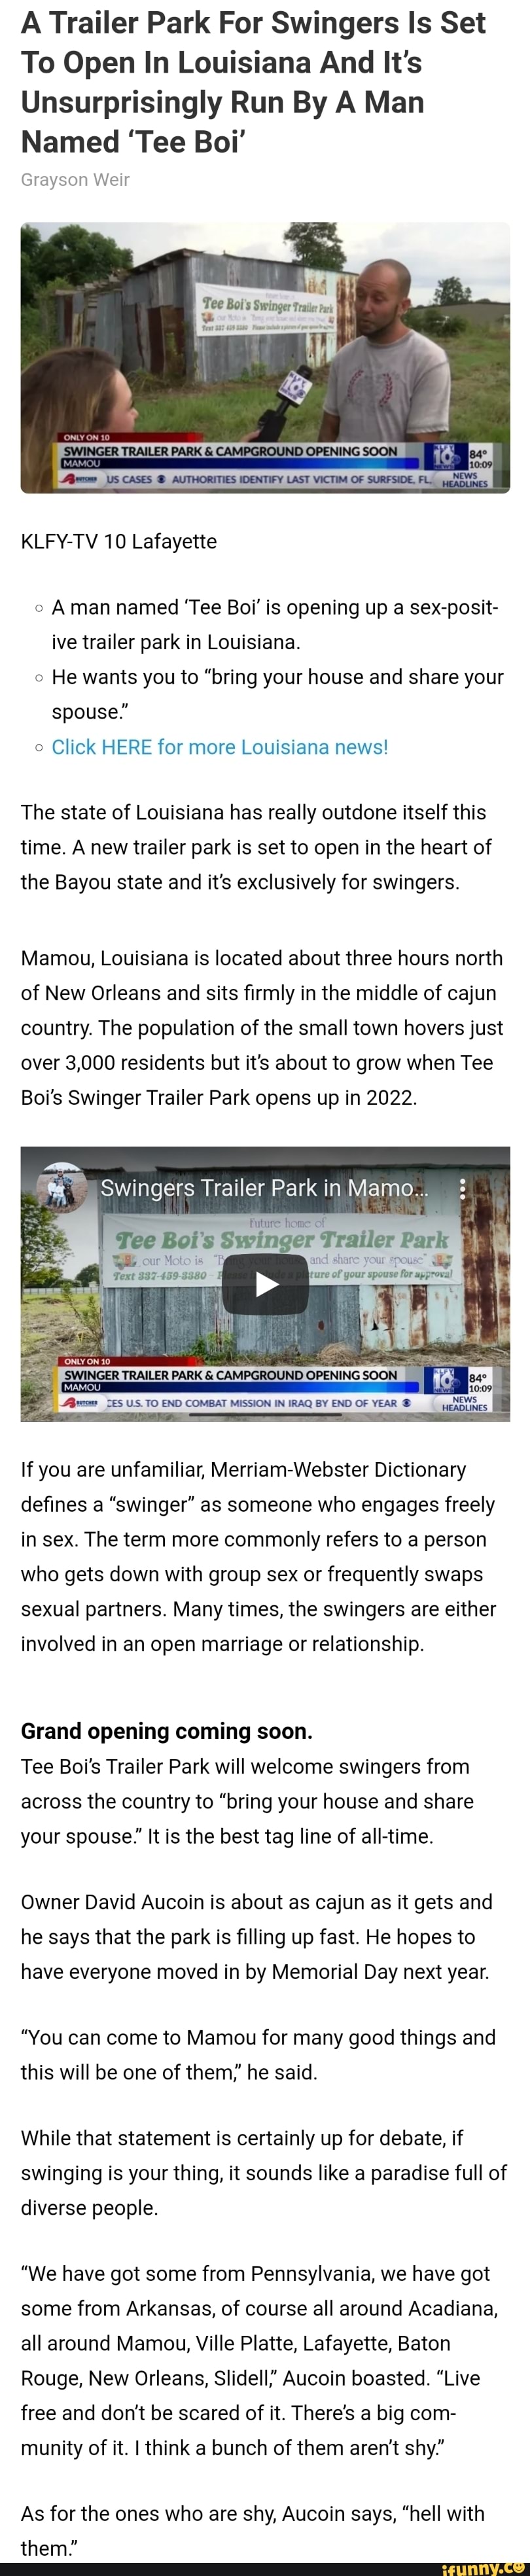 A Trailer Park For Swingers Is Set To Open In Louisiana And Its Unsurprisingly Run By